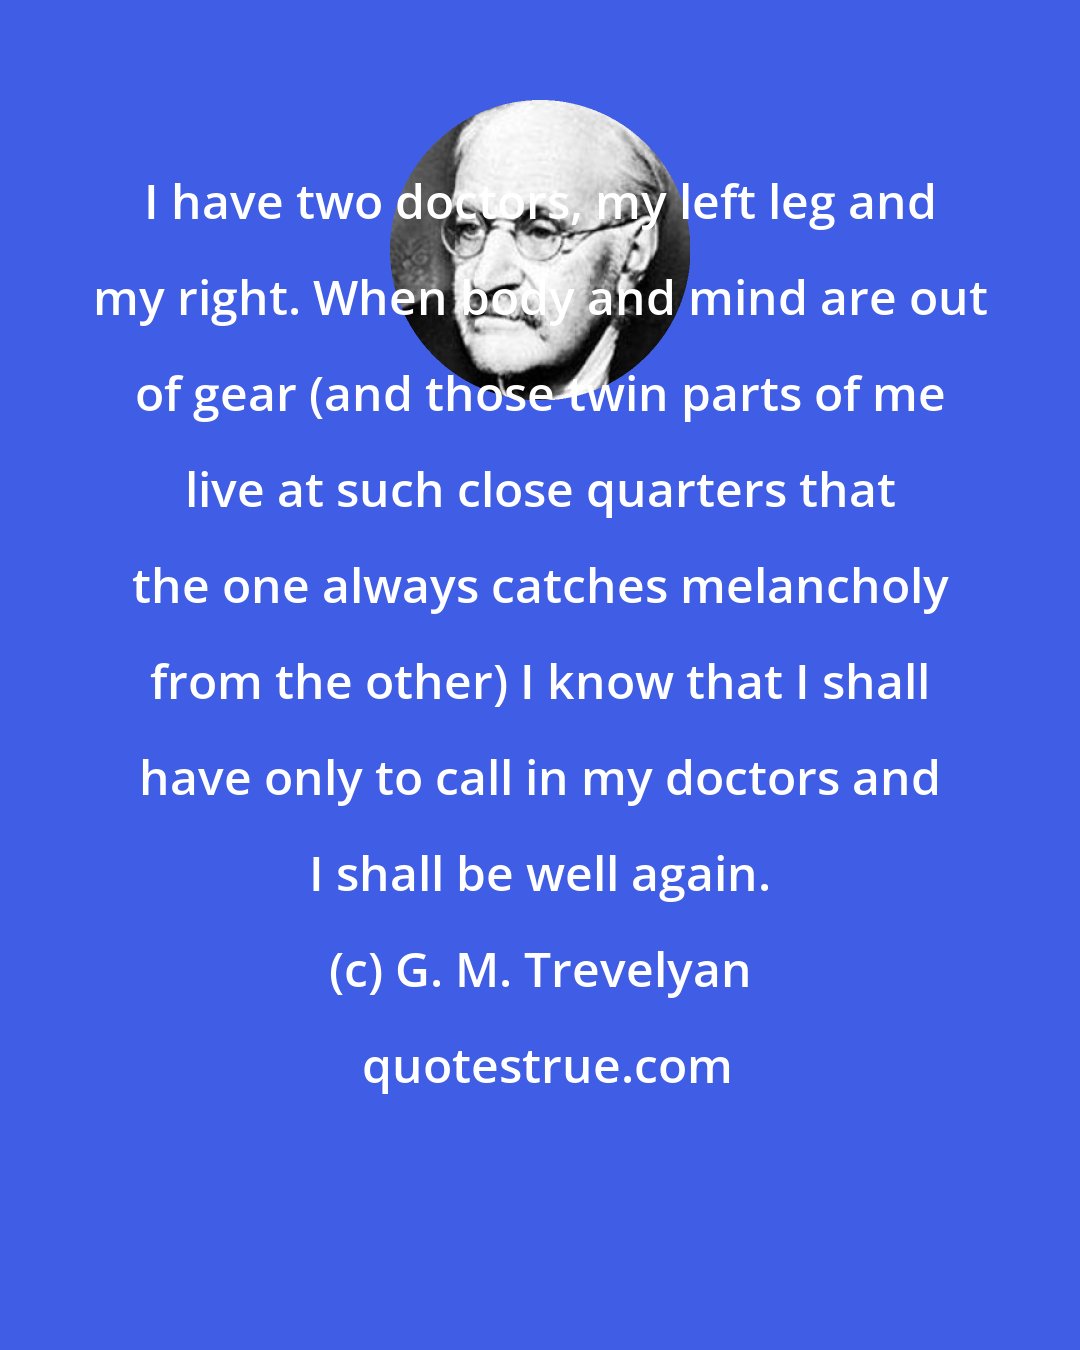 G. M. Trevelyan: I have two doctors, my left leg and my right. When body and mind are out of gear (and those twin parts of me live at such close quarters that the one always catches melancholy from the other) I know that I shall have only to call in my doctors and I shall be well again.